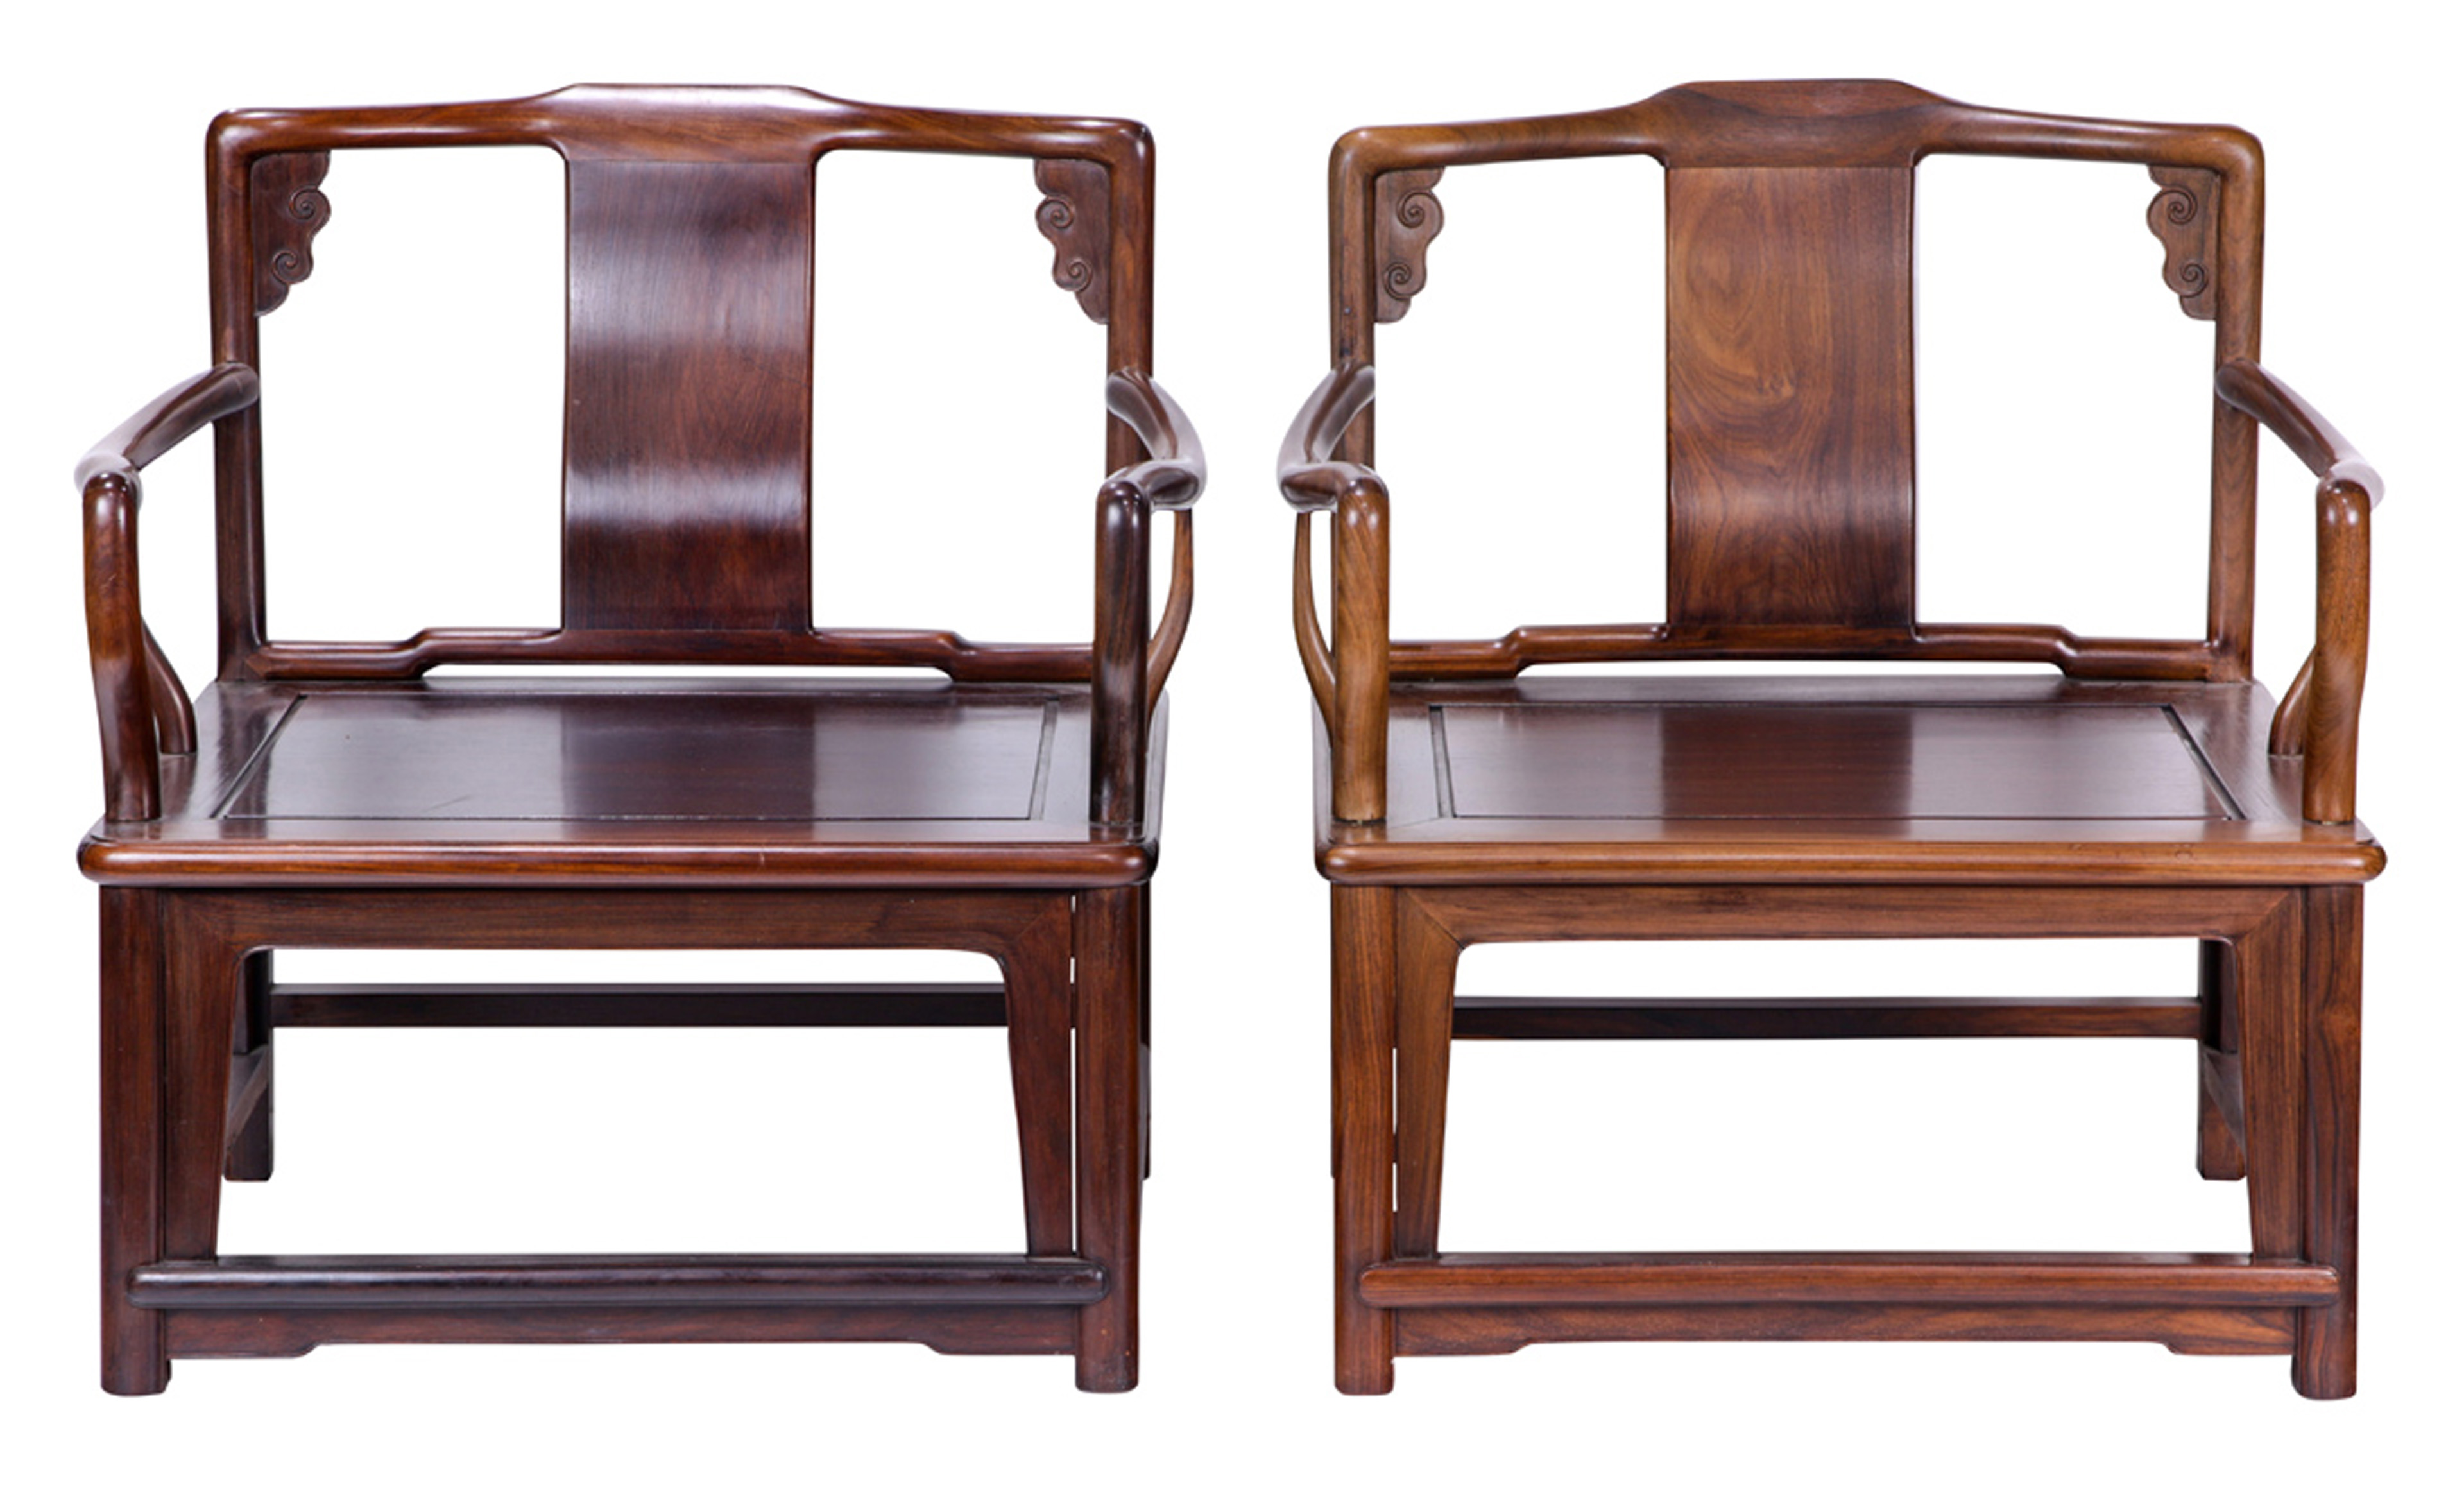 PAIR OF CHINESE HARDWOOD ARMCHAIRS 3a5e21